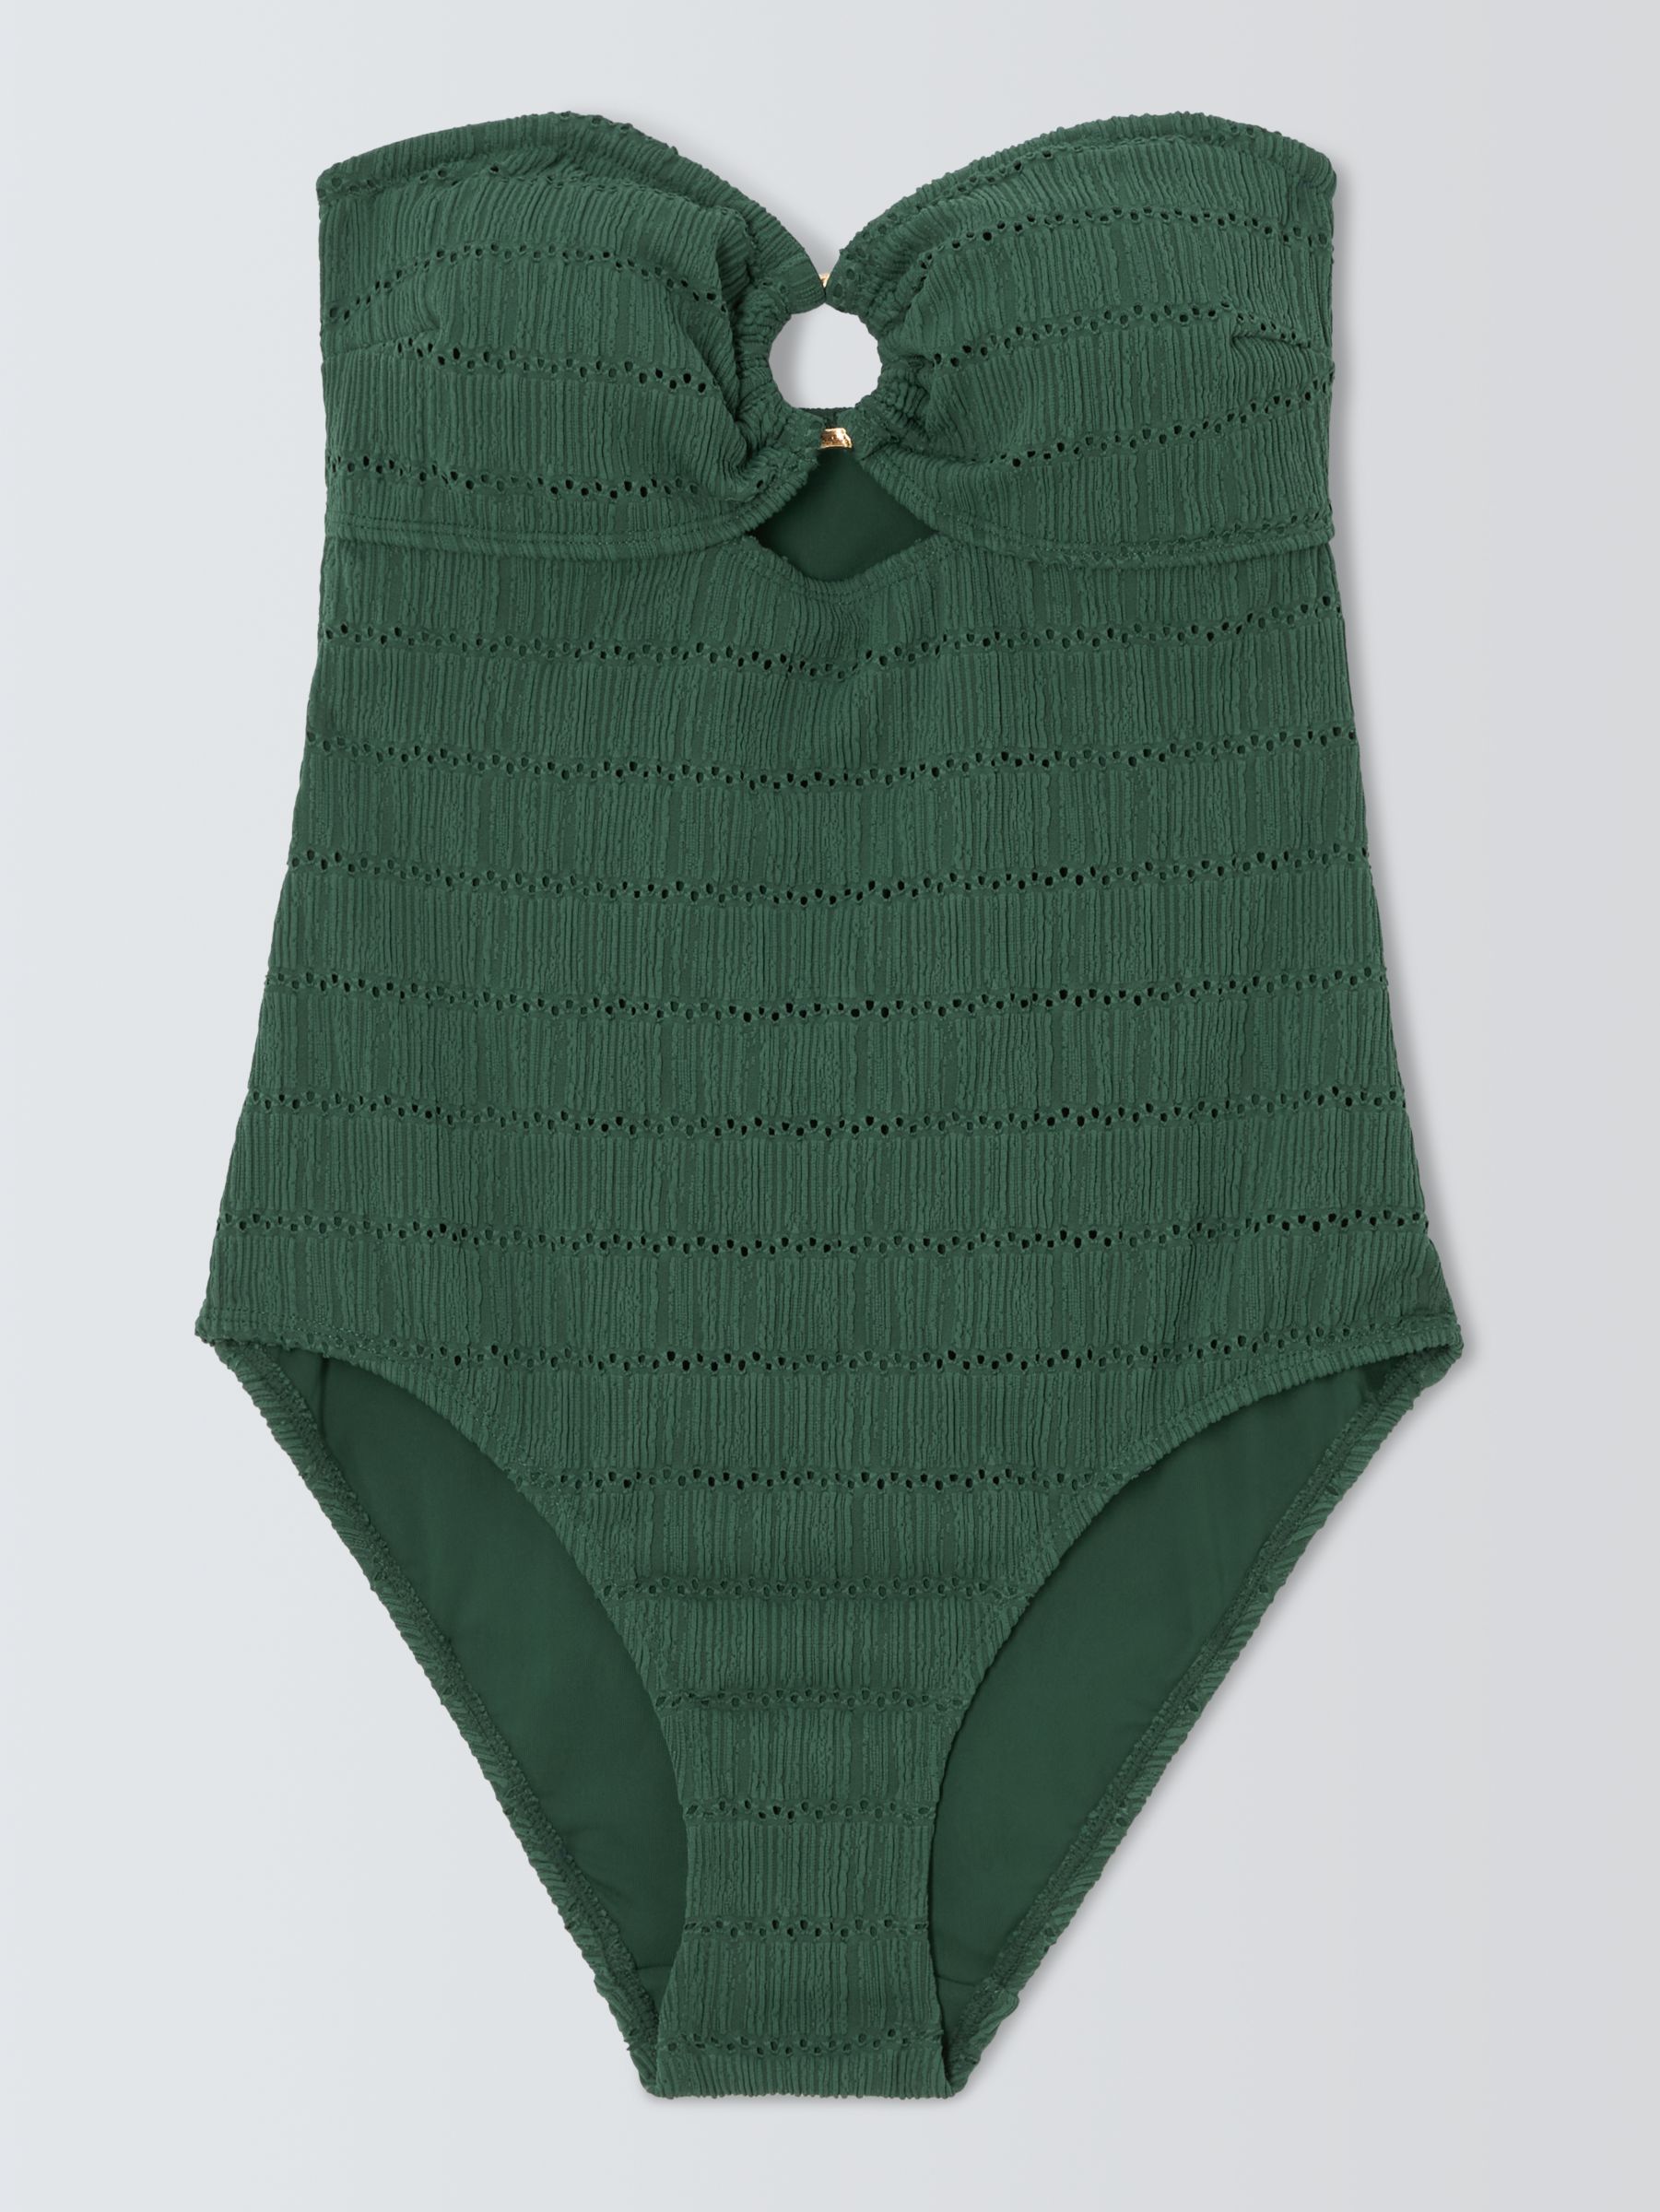 AND/OR Bali Crochet Swimsuit, Green, 18